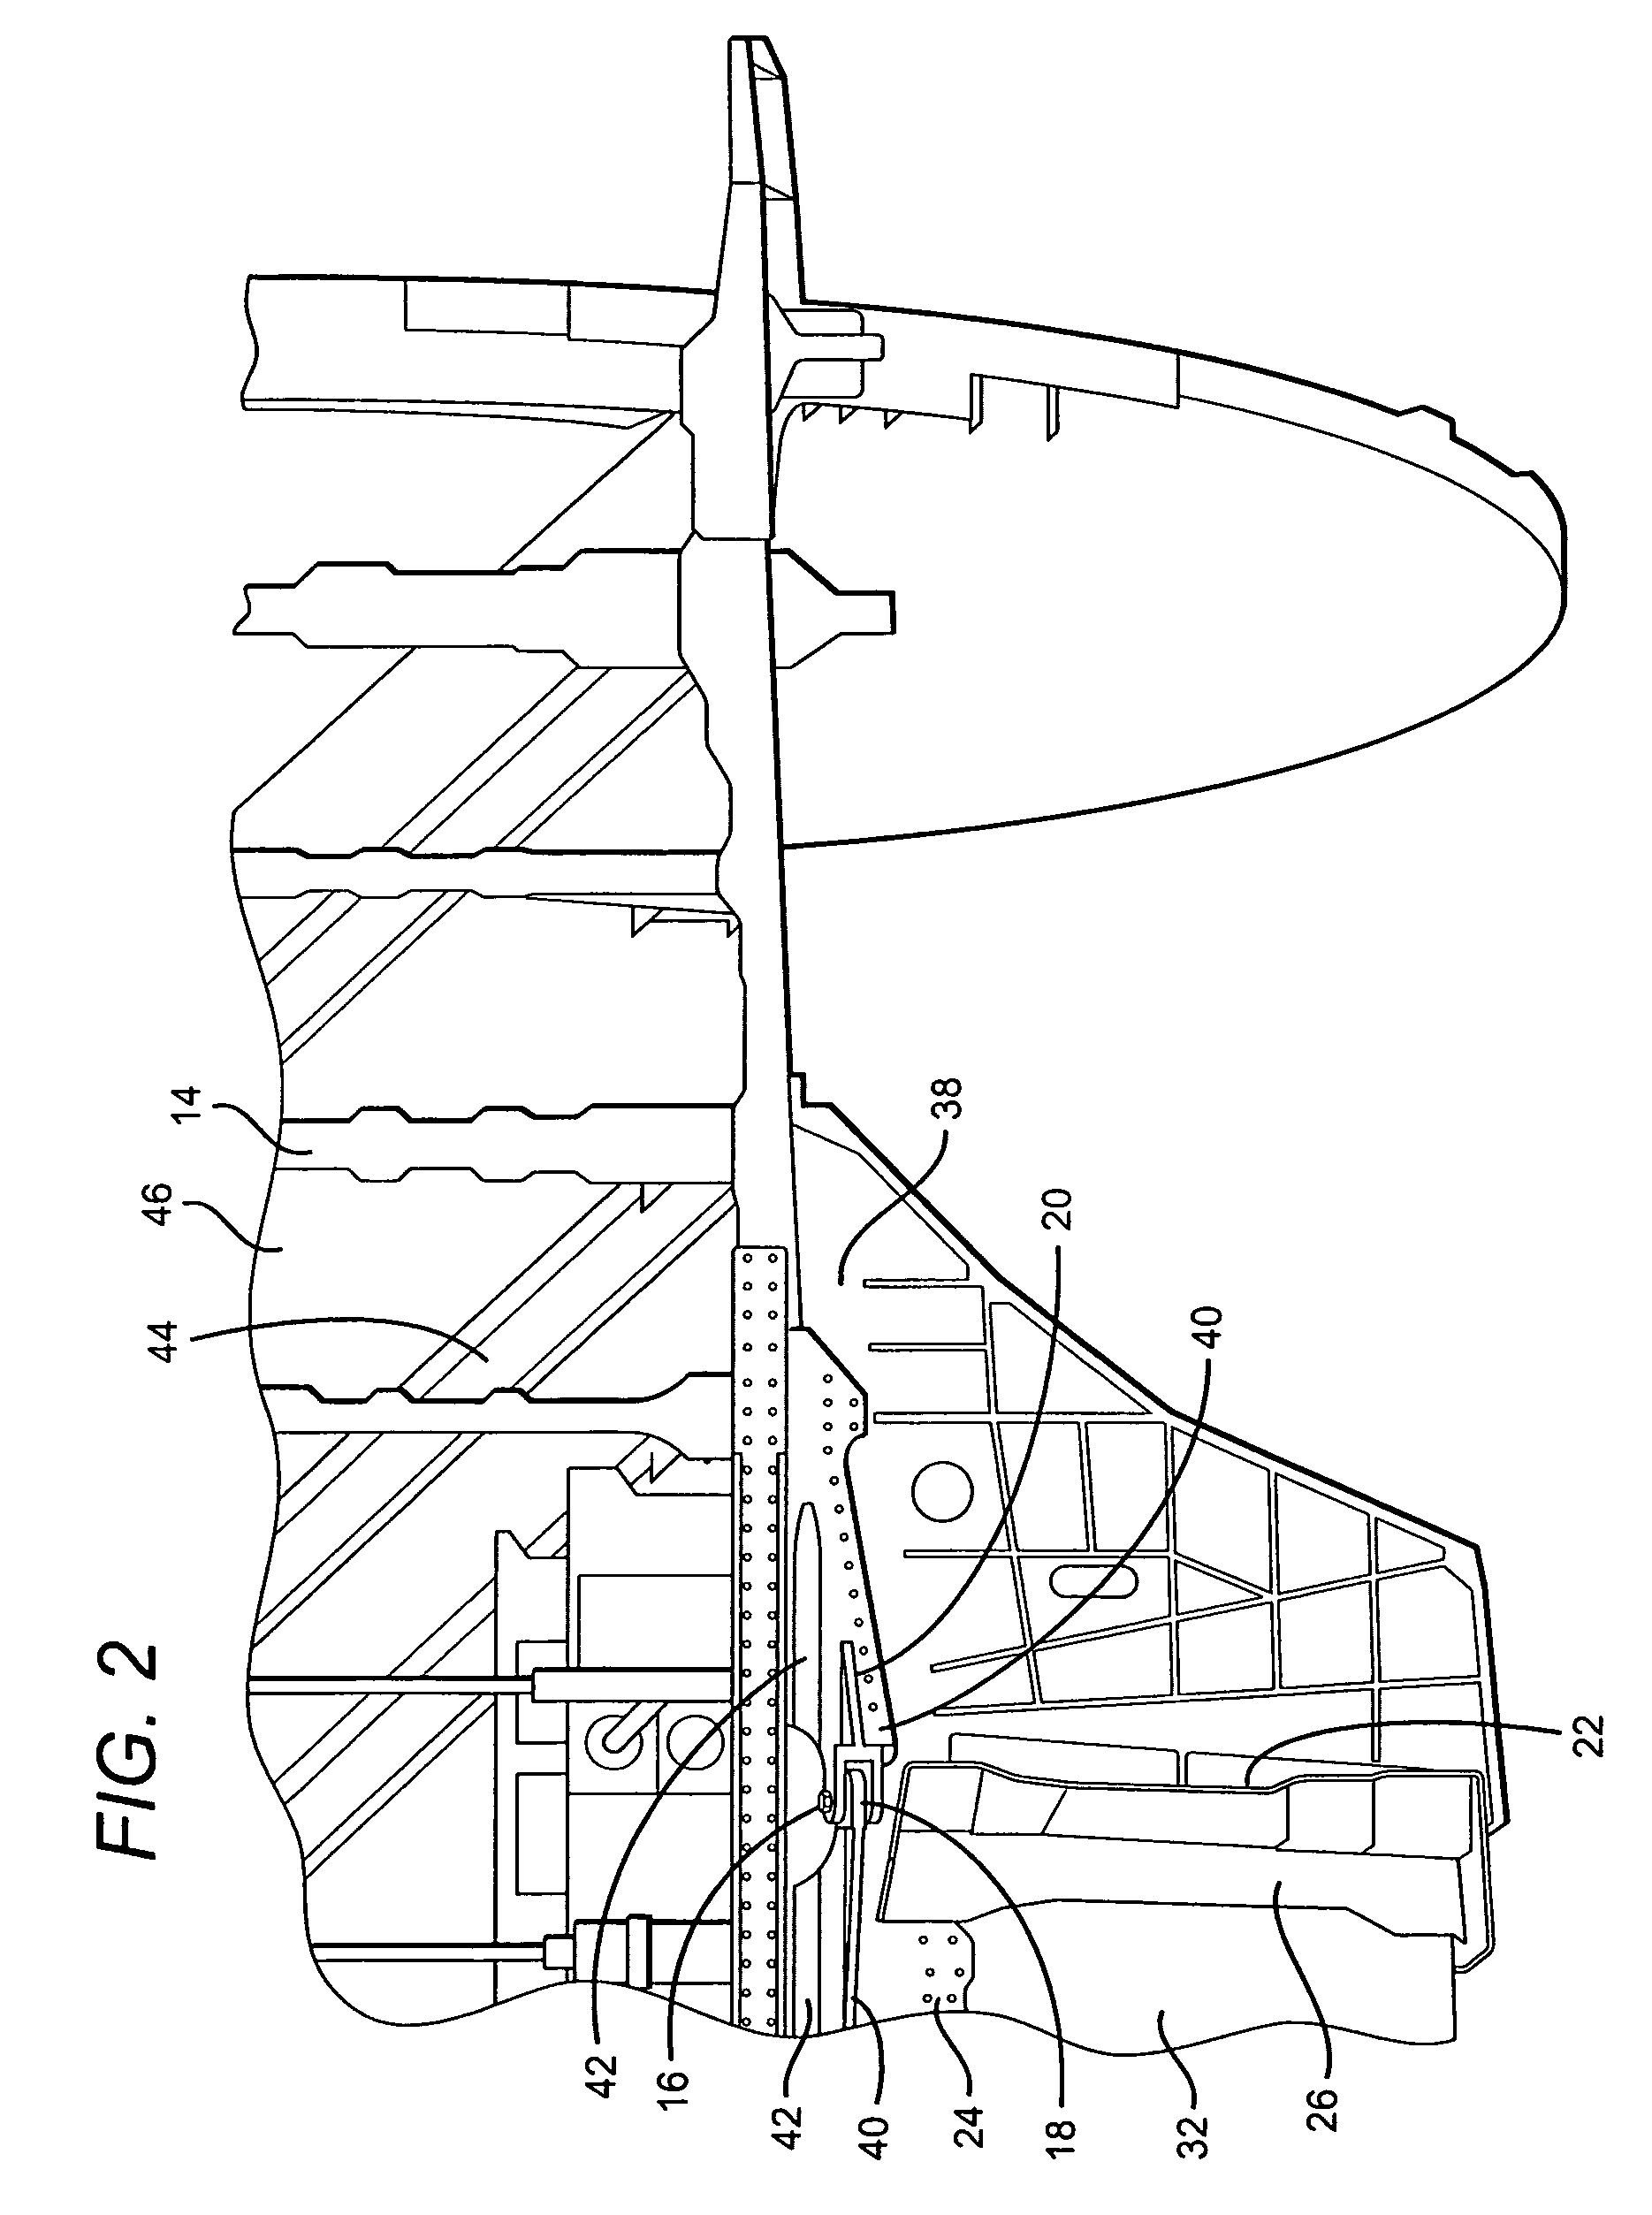 Trapezoidal panel pin joint allowing free deflection between fuselage and wing